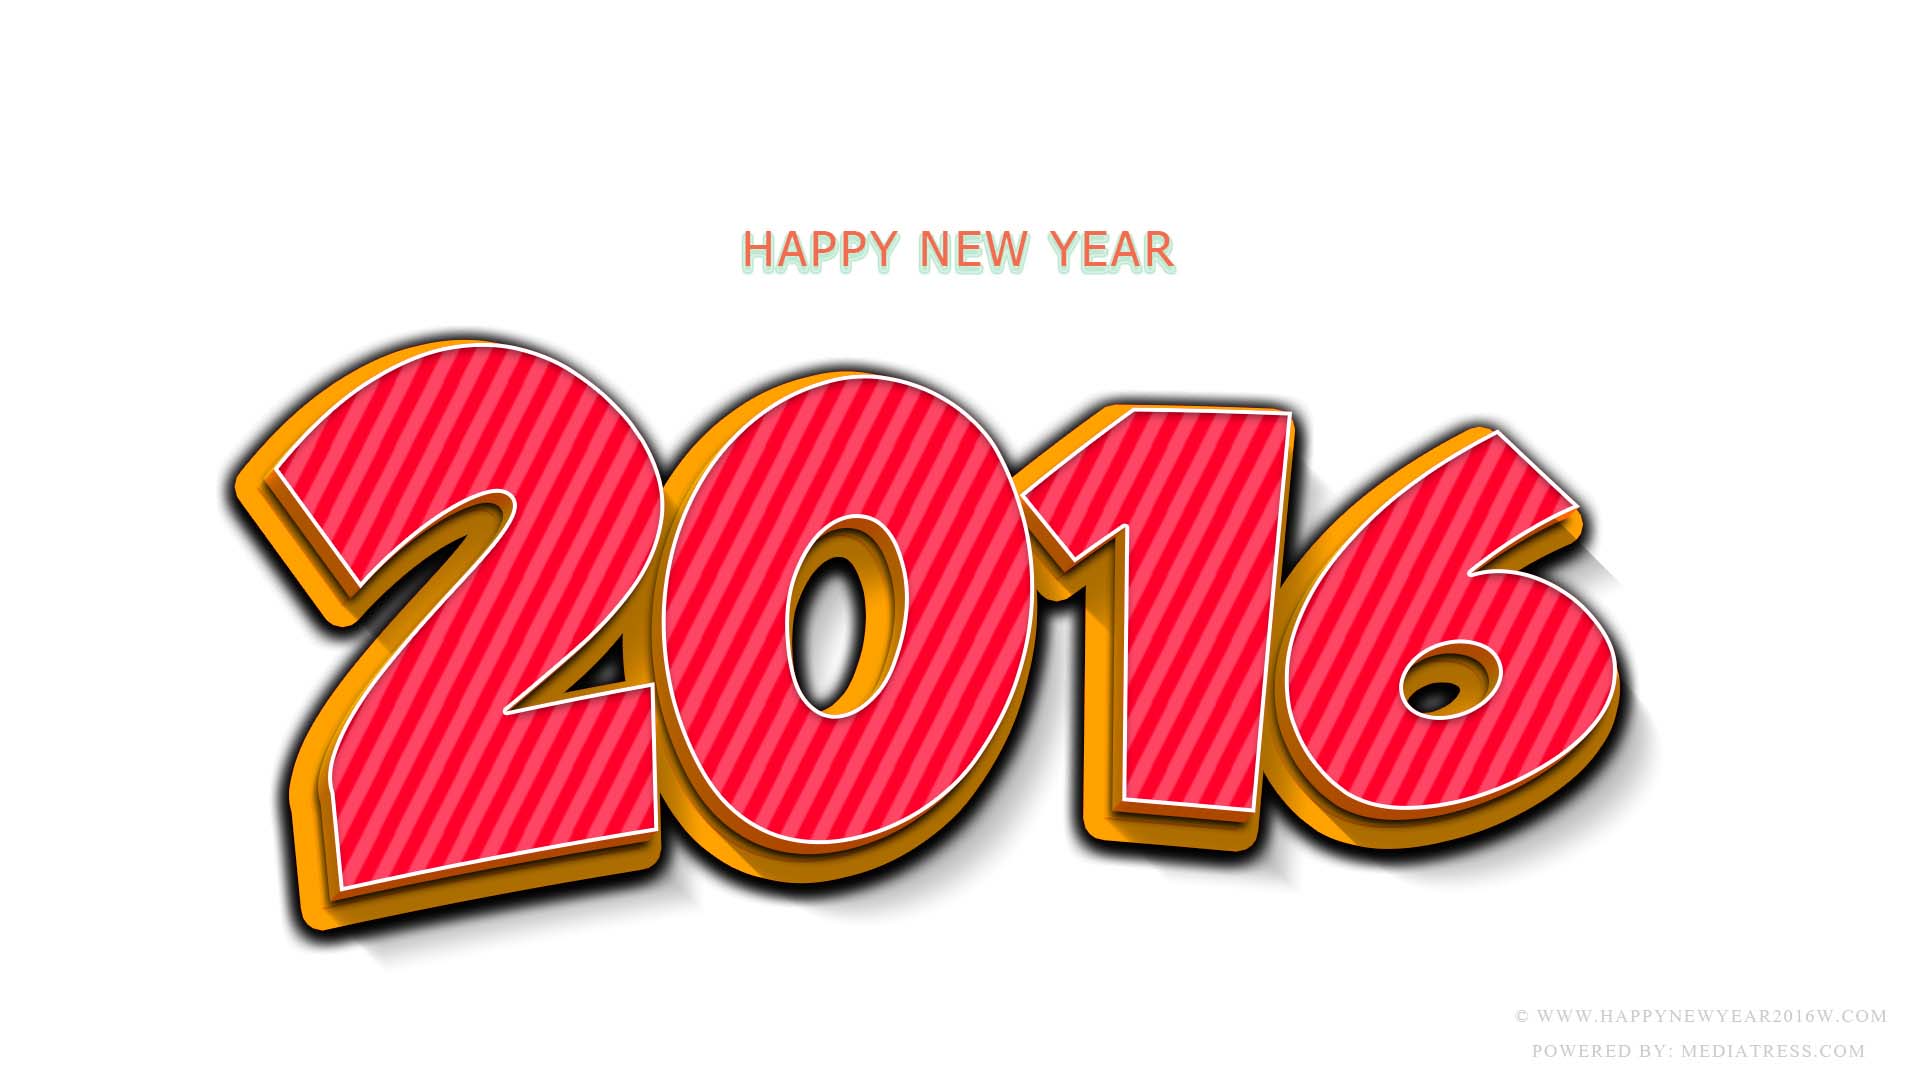 Happy New Year 2016 Beautiful Picture